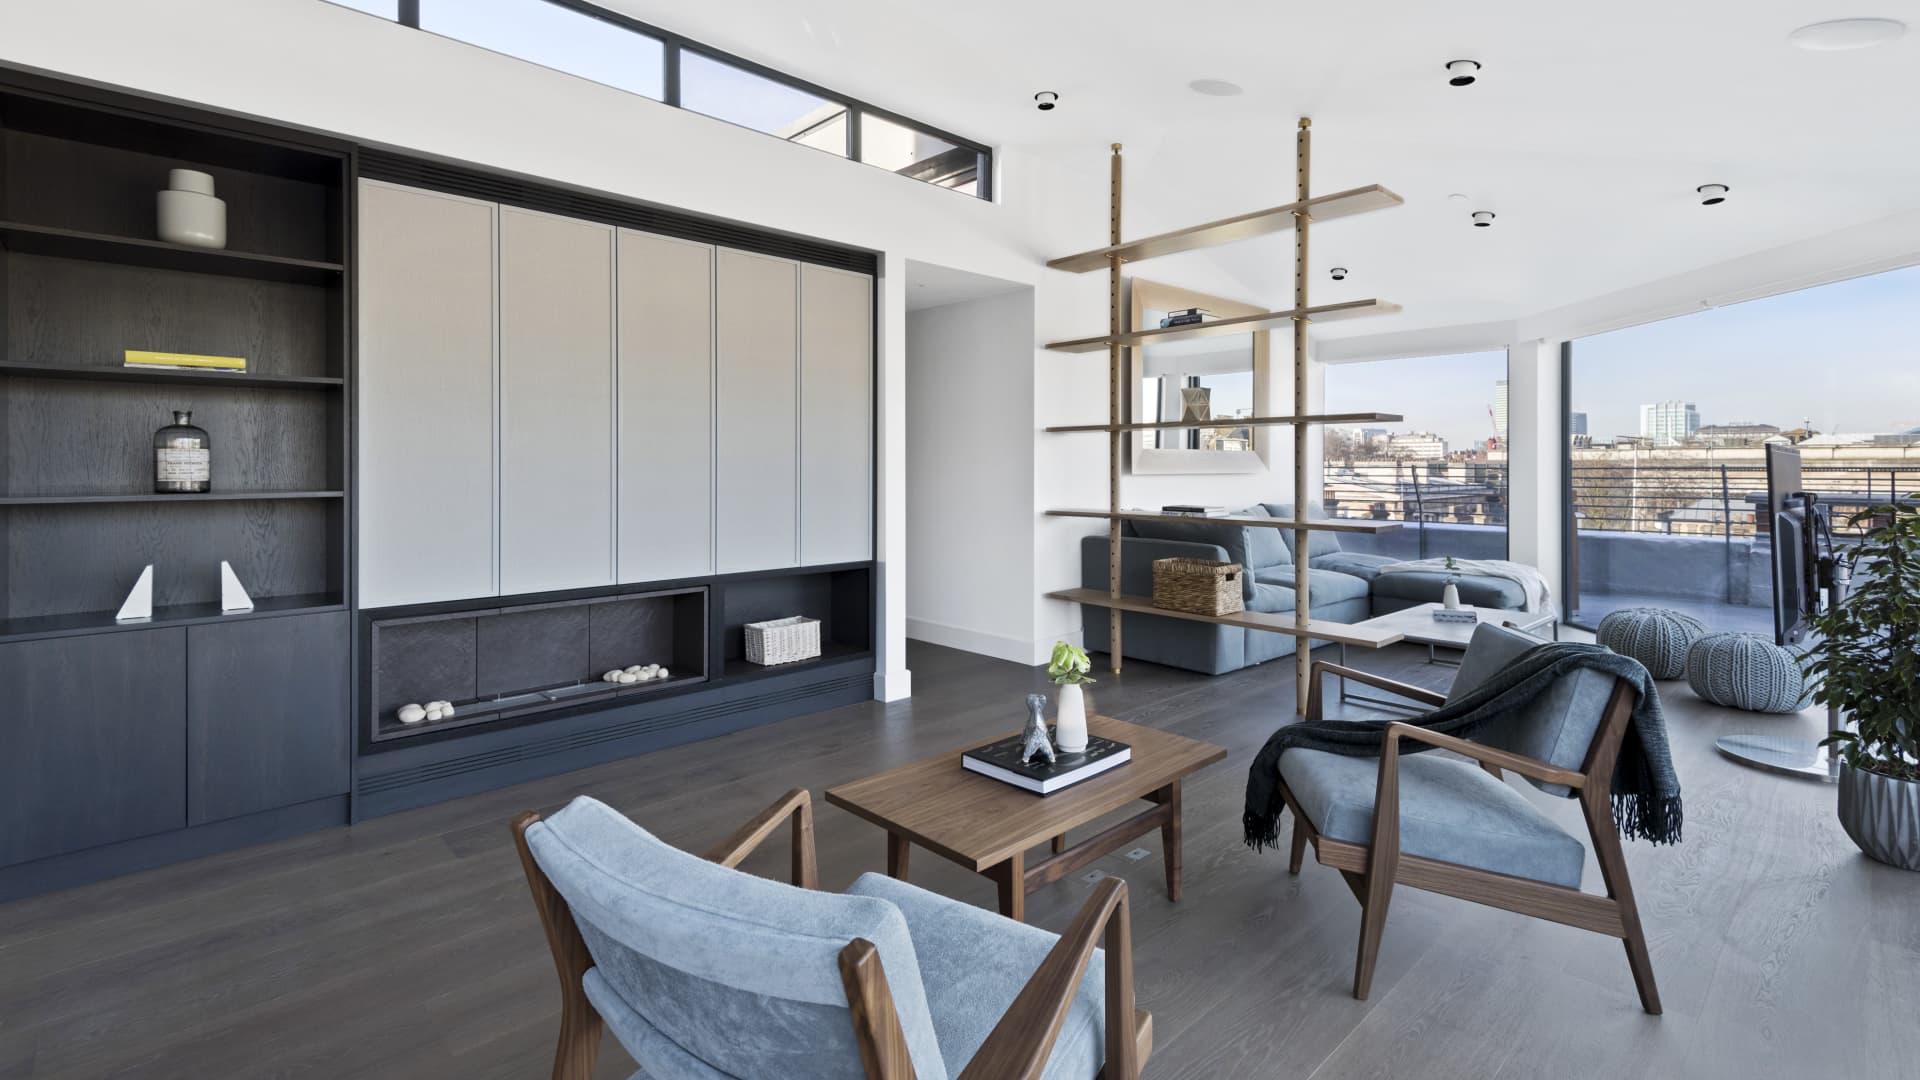 A three-bedroom penthouse in London that is available to rent through Sonder.